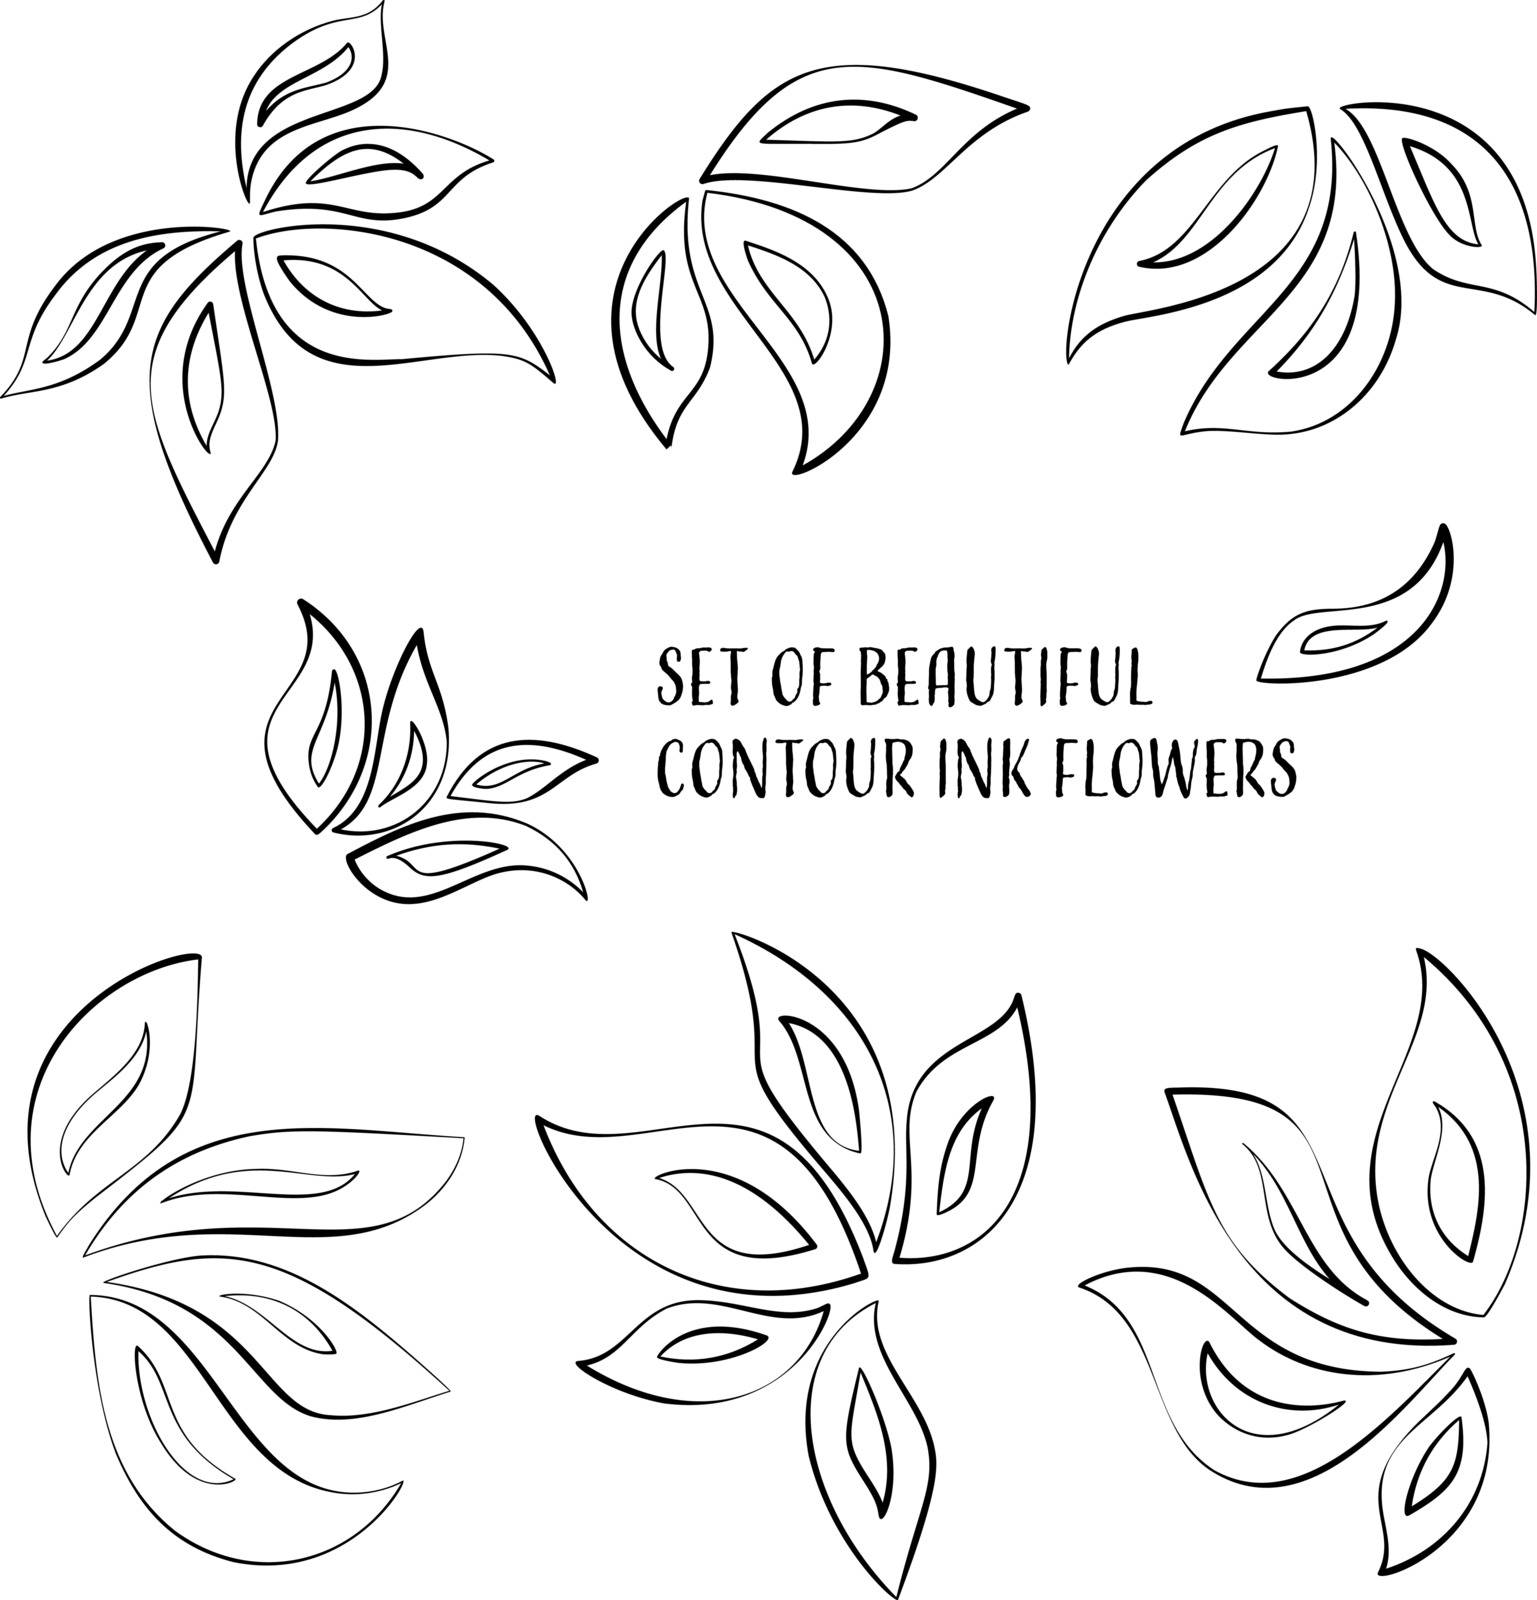 Contour ink flowers by clusterx